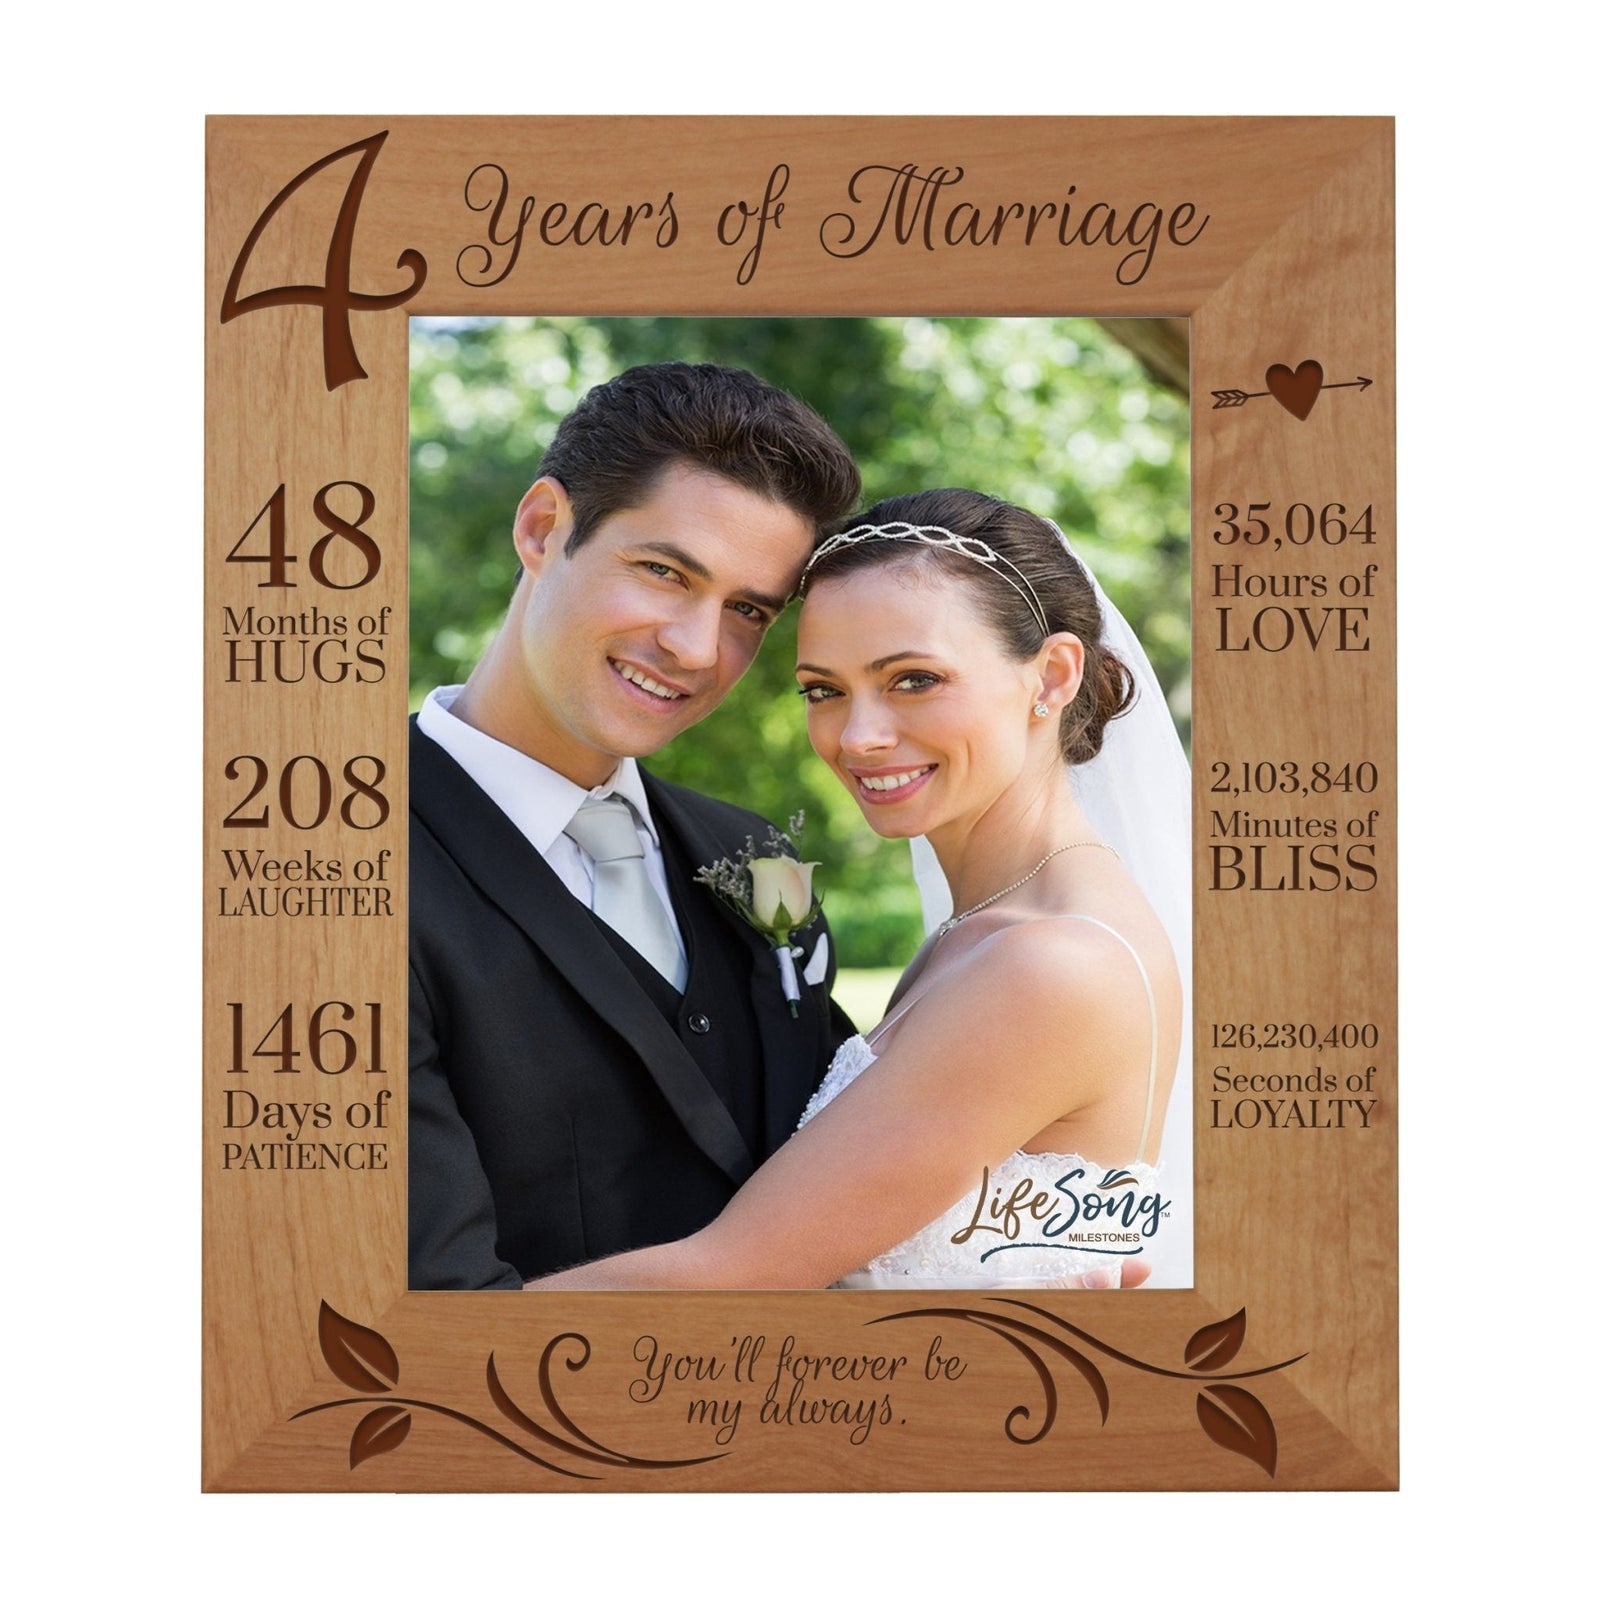 Couples 4th Wedding Anniversary Photo Frame Home Decor Gift Ideas - Forever Be My Always - LifeSong Milestones